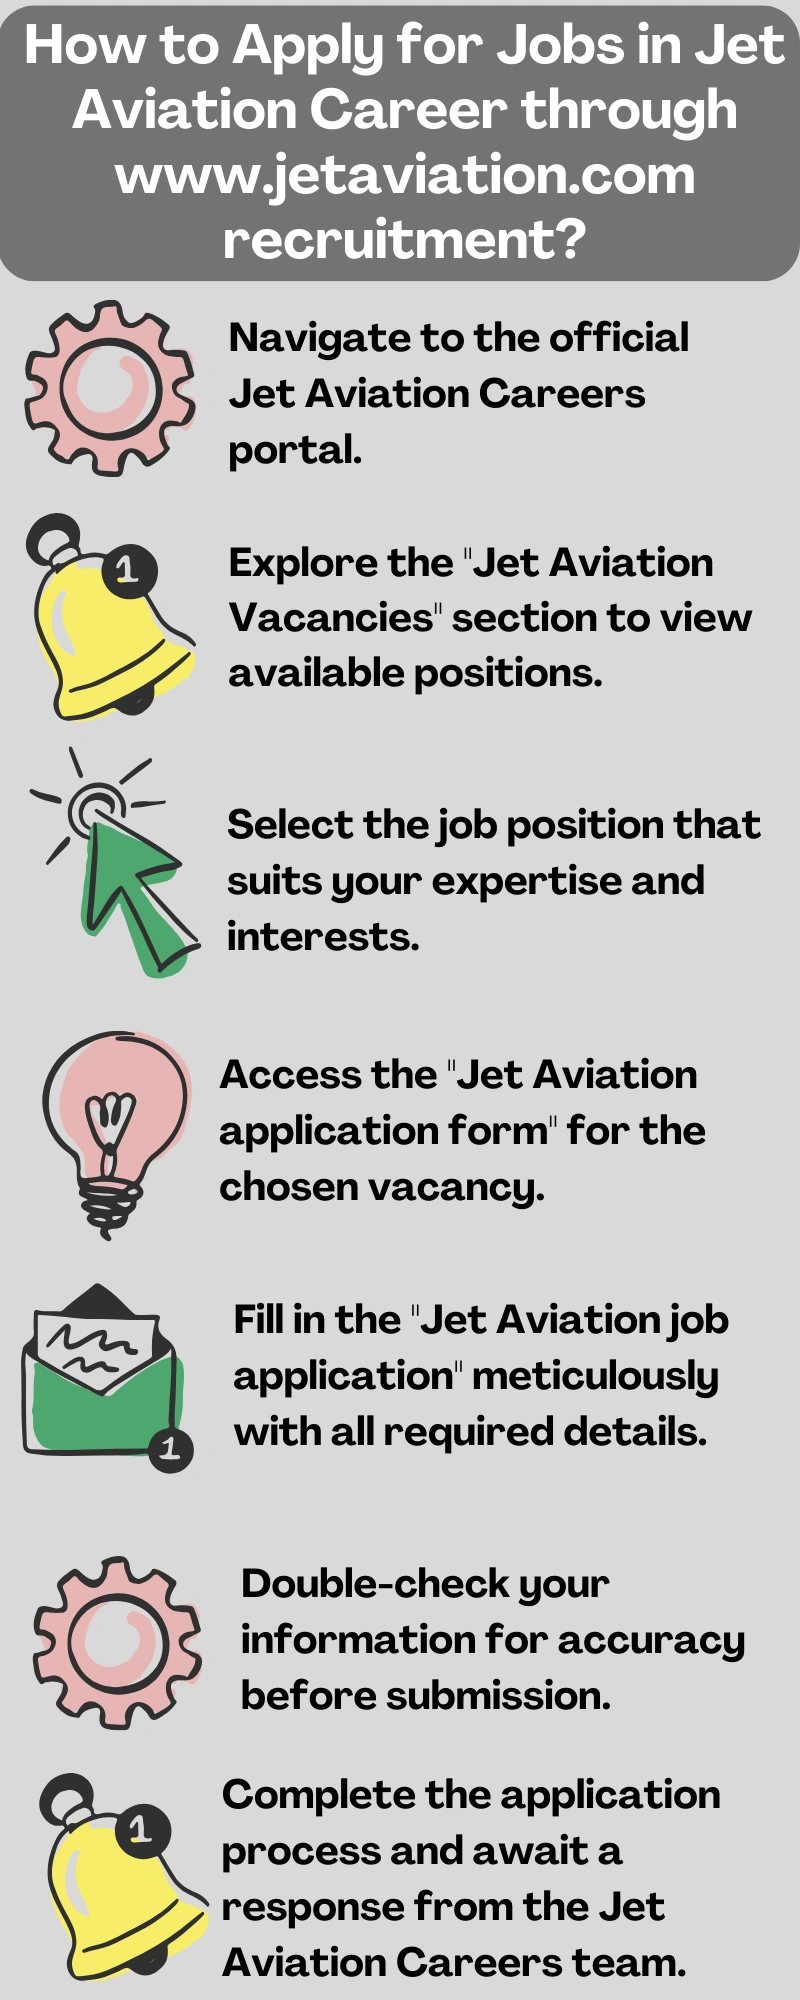 How to Apply for Jobs in Jet Aviation Career through www.jetaviation.com recruitment